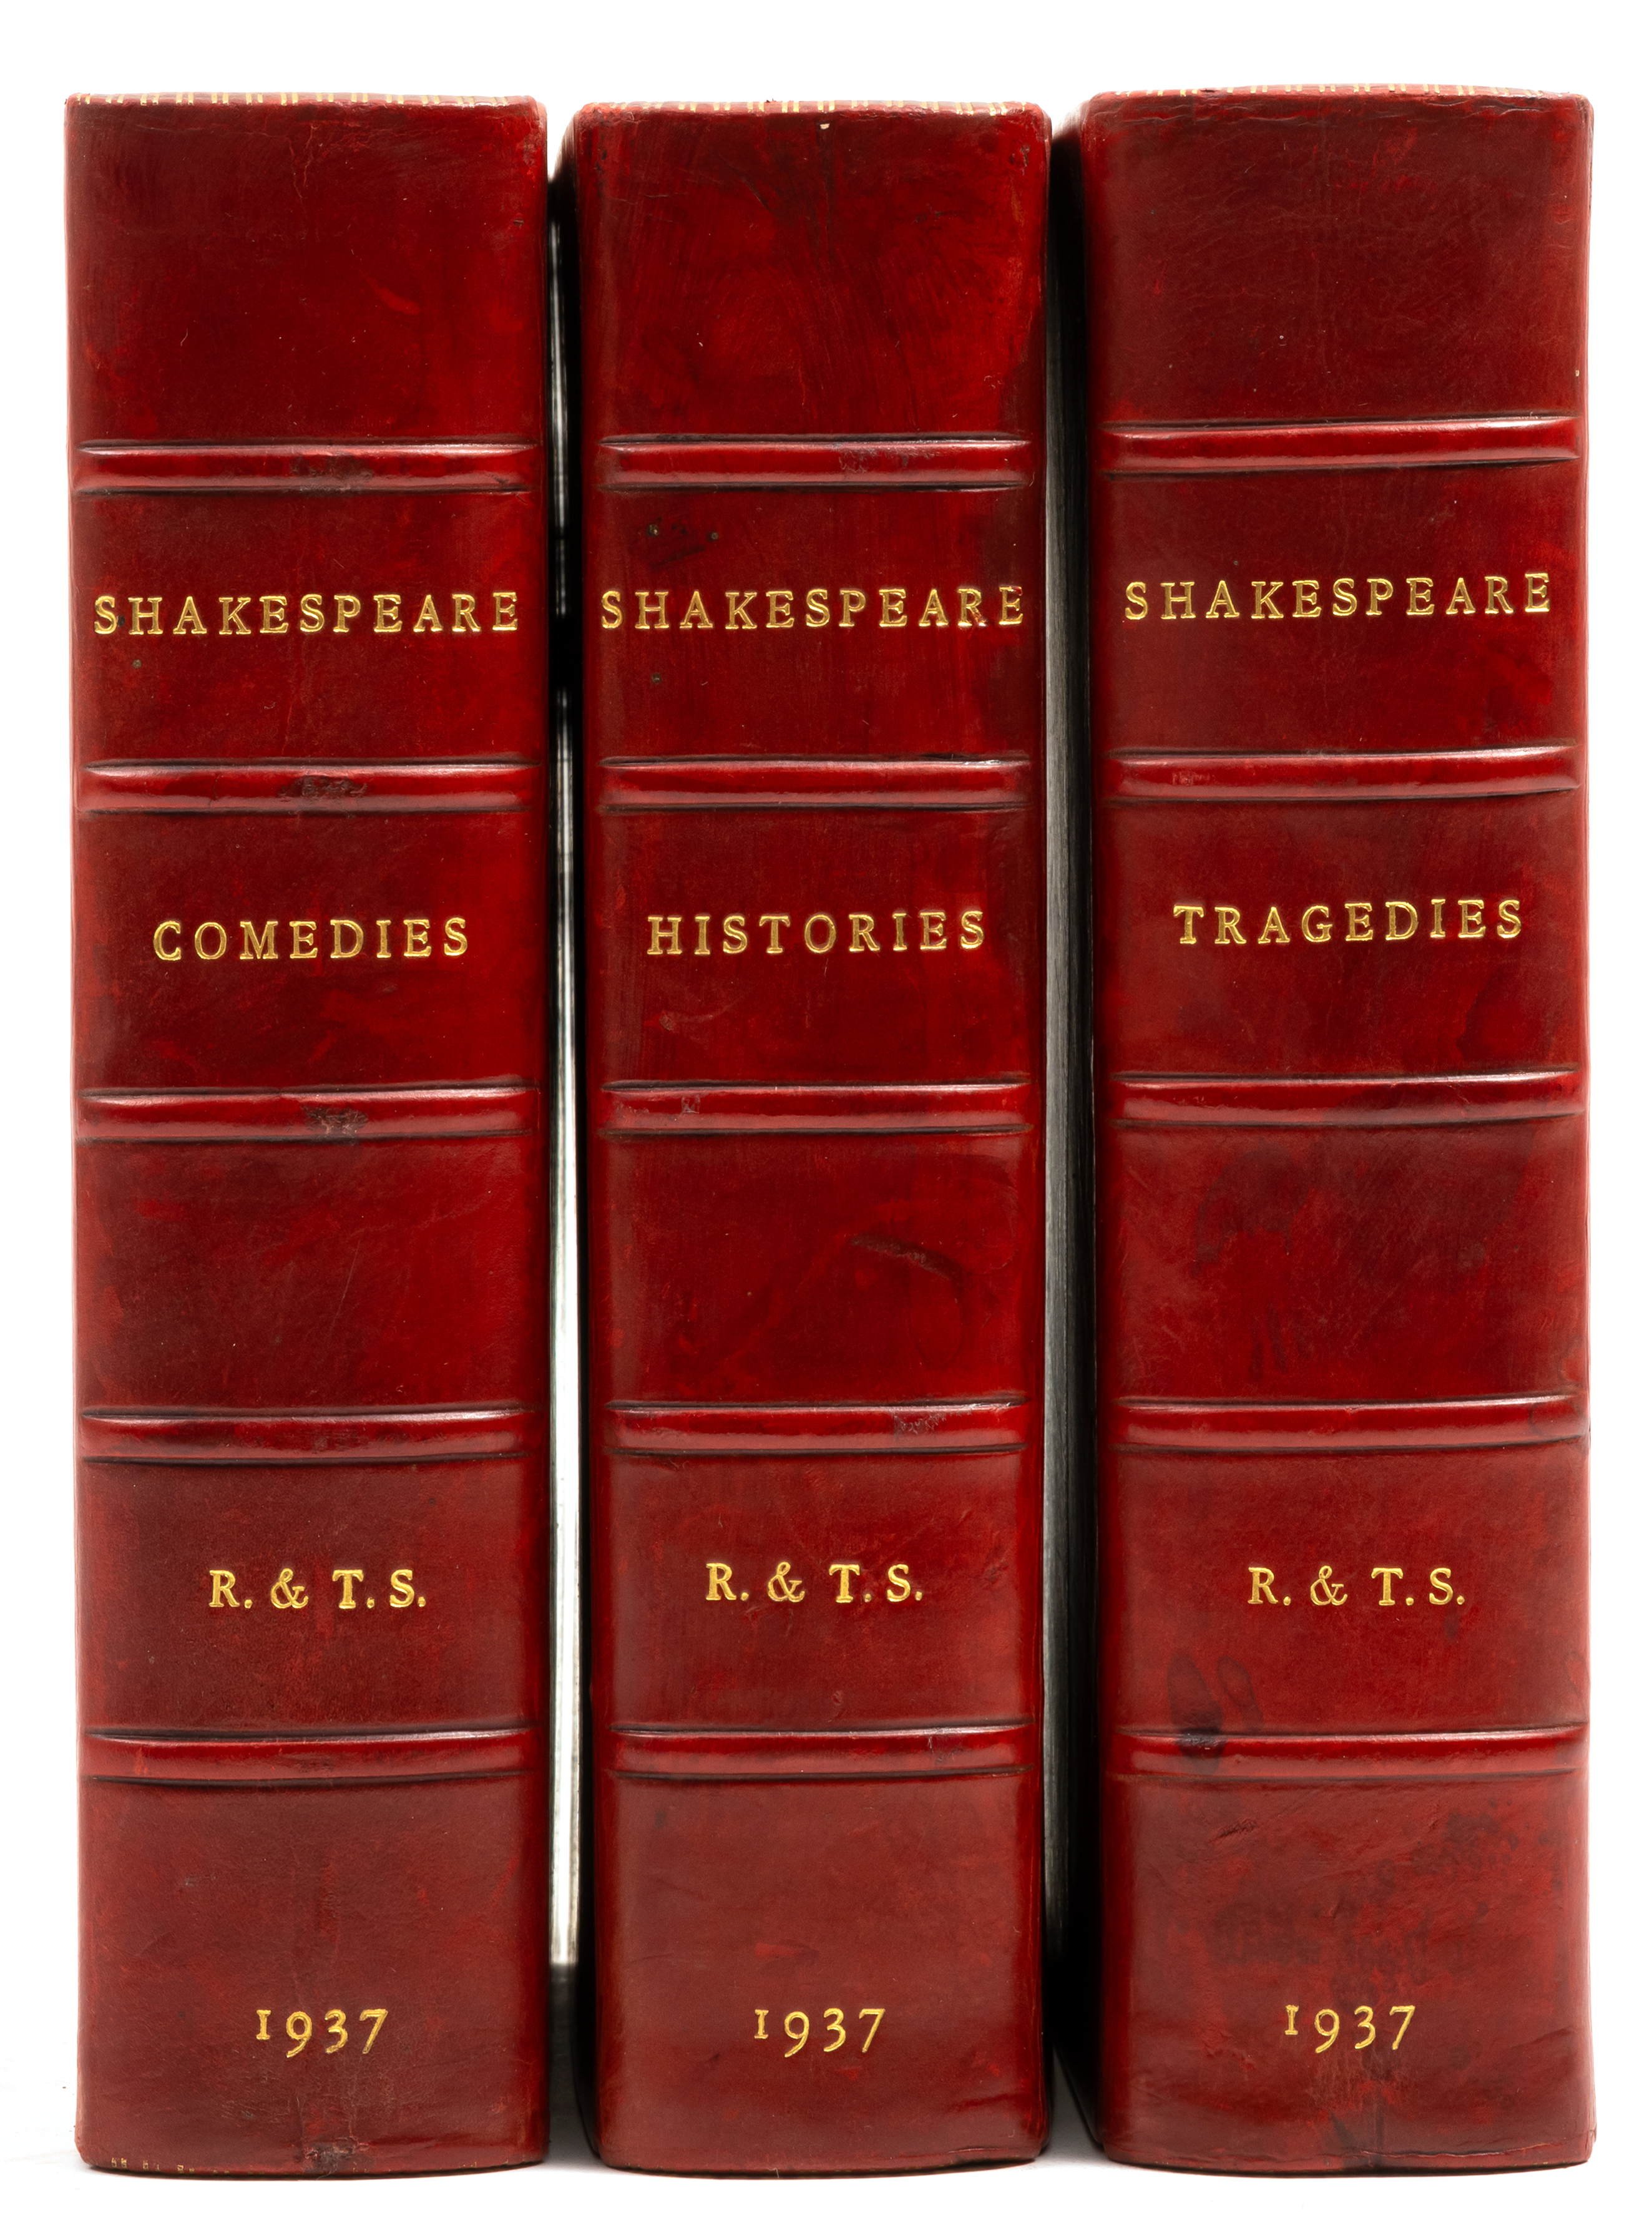 Shakespeare (William) [Works], 3 vol., an attractive set in red calf, 1937.